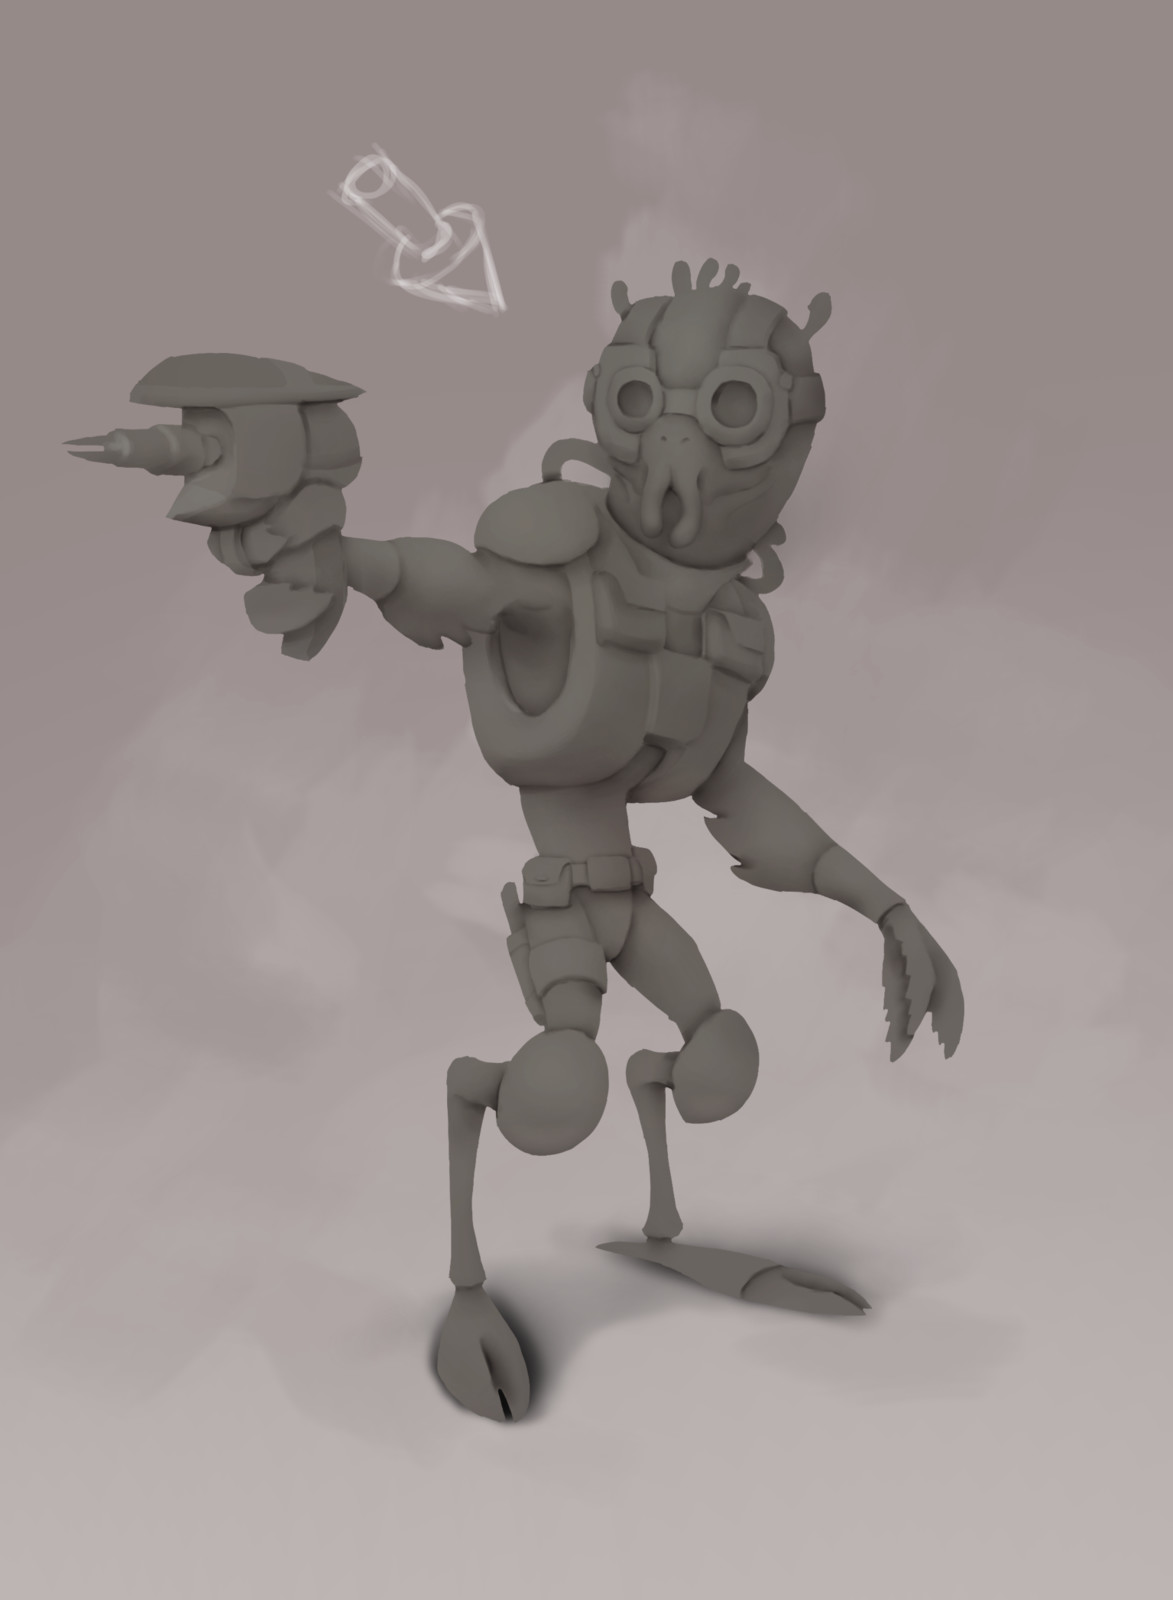 2d Ambient Occlusion study
